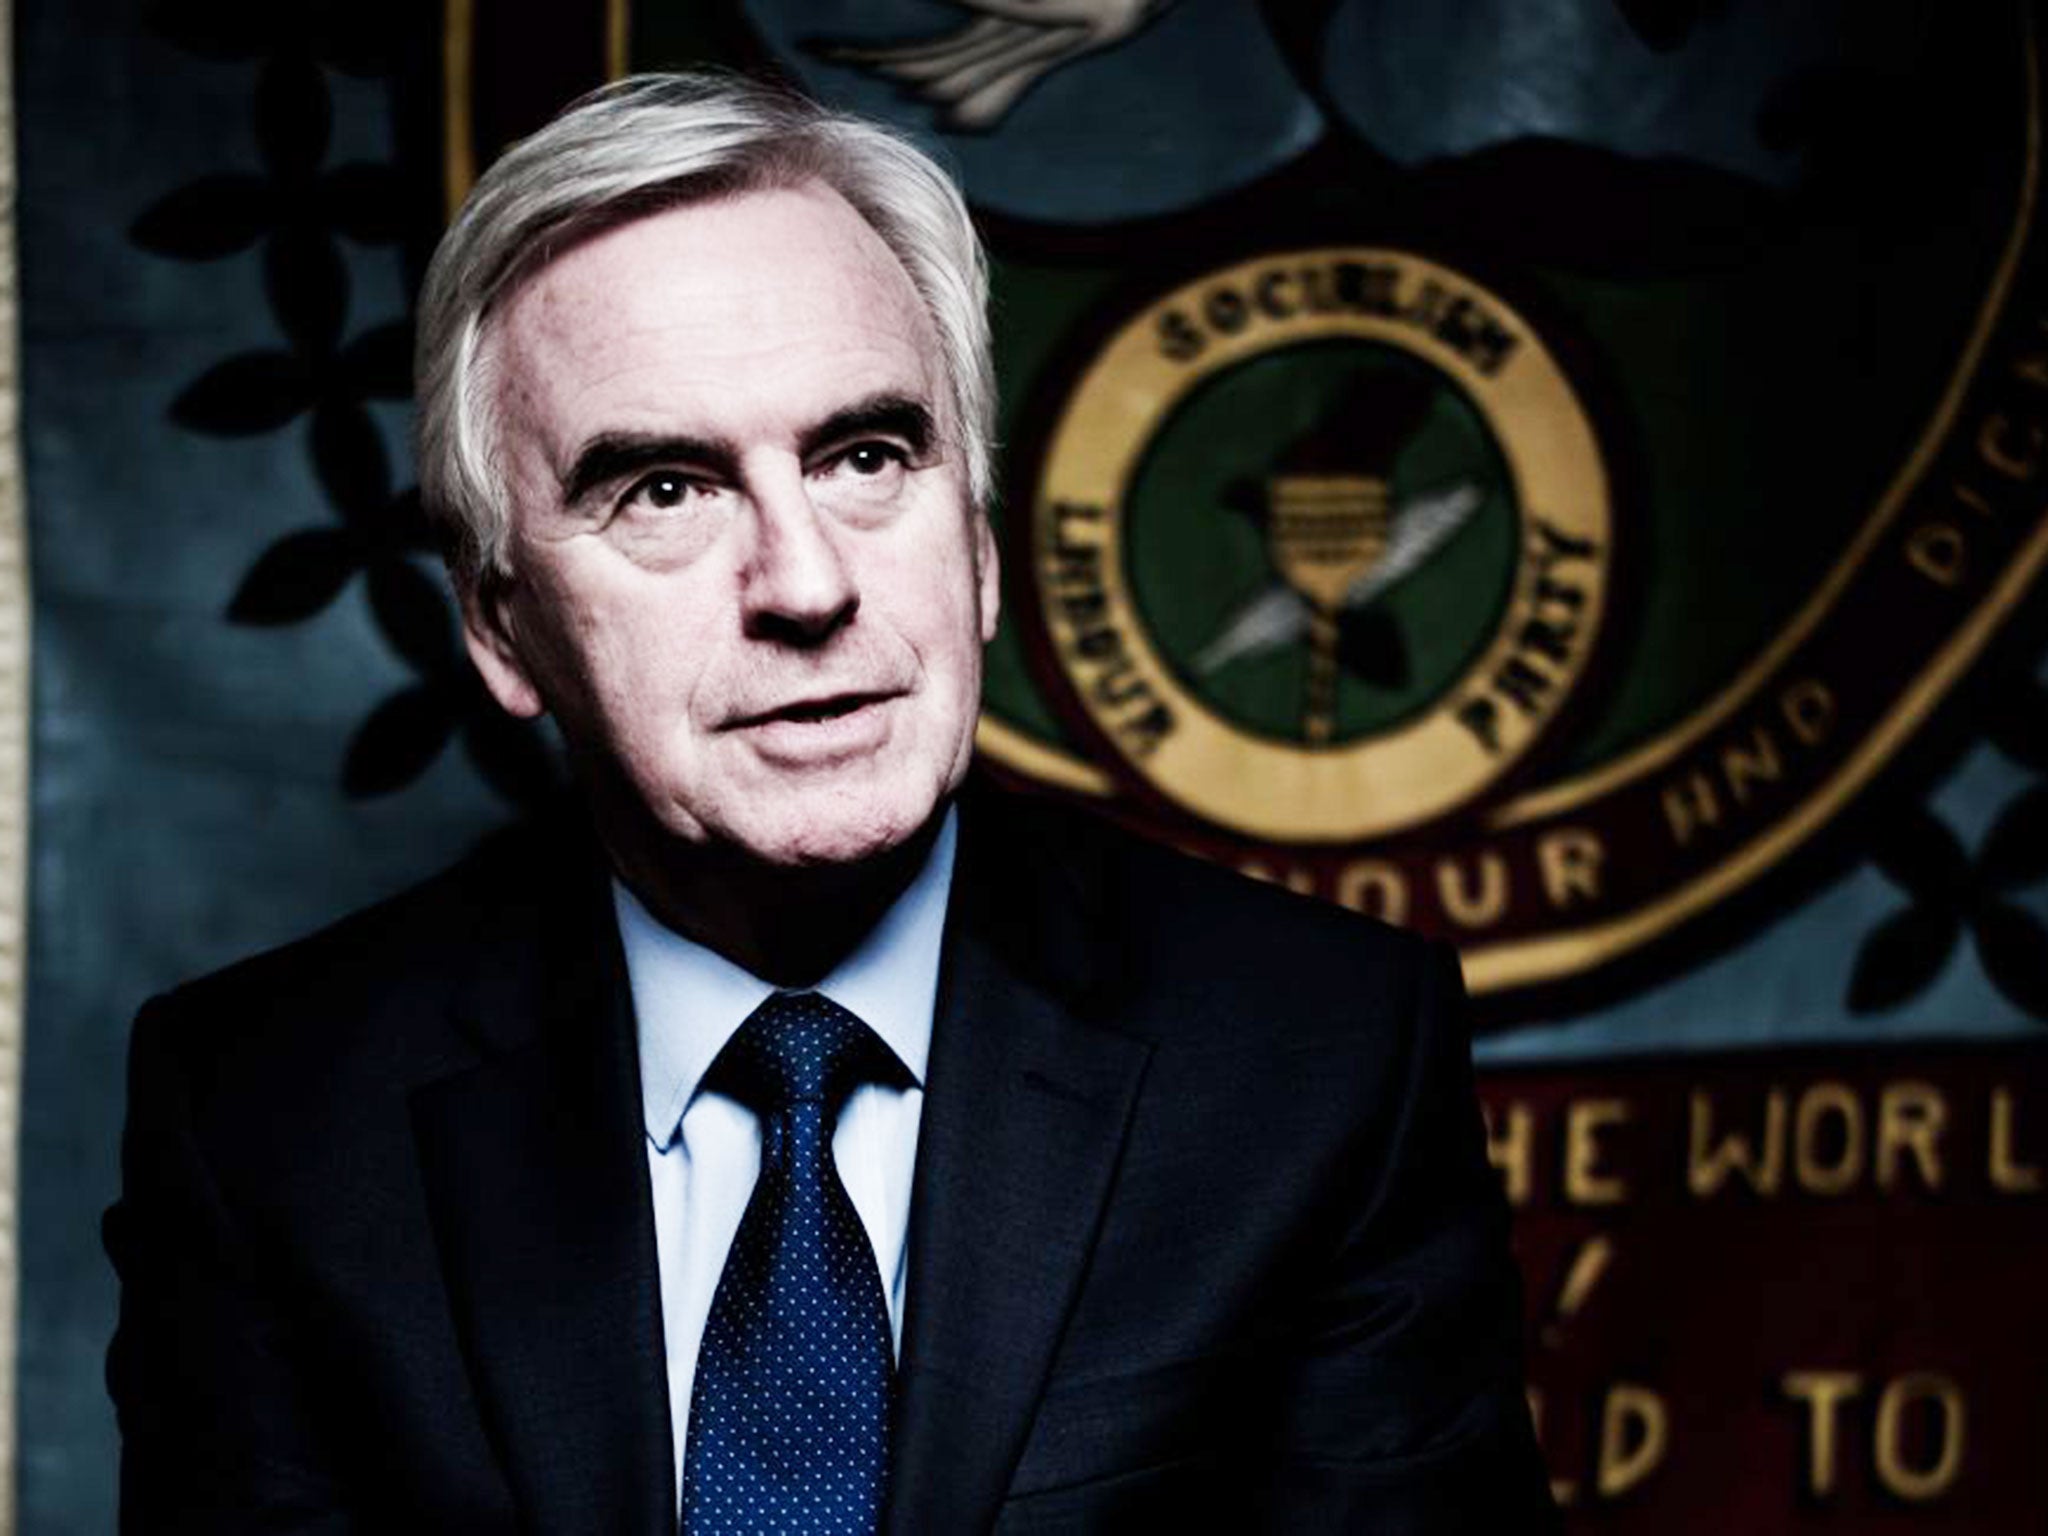 John McDonnell doesn’t think the issue is being used as a stick to attack the leadership